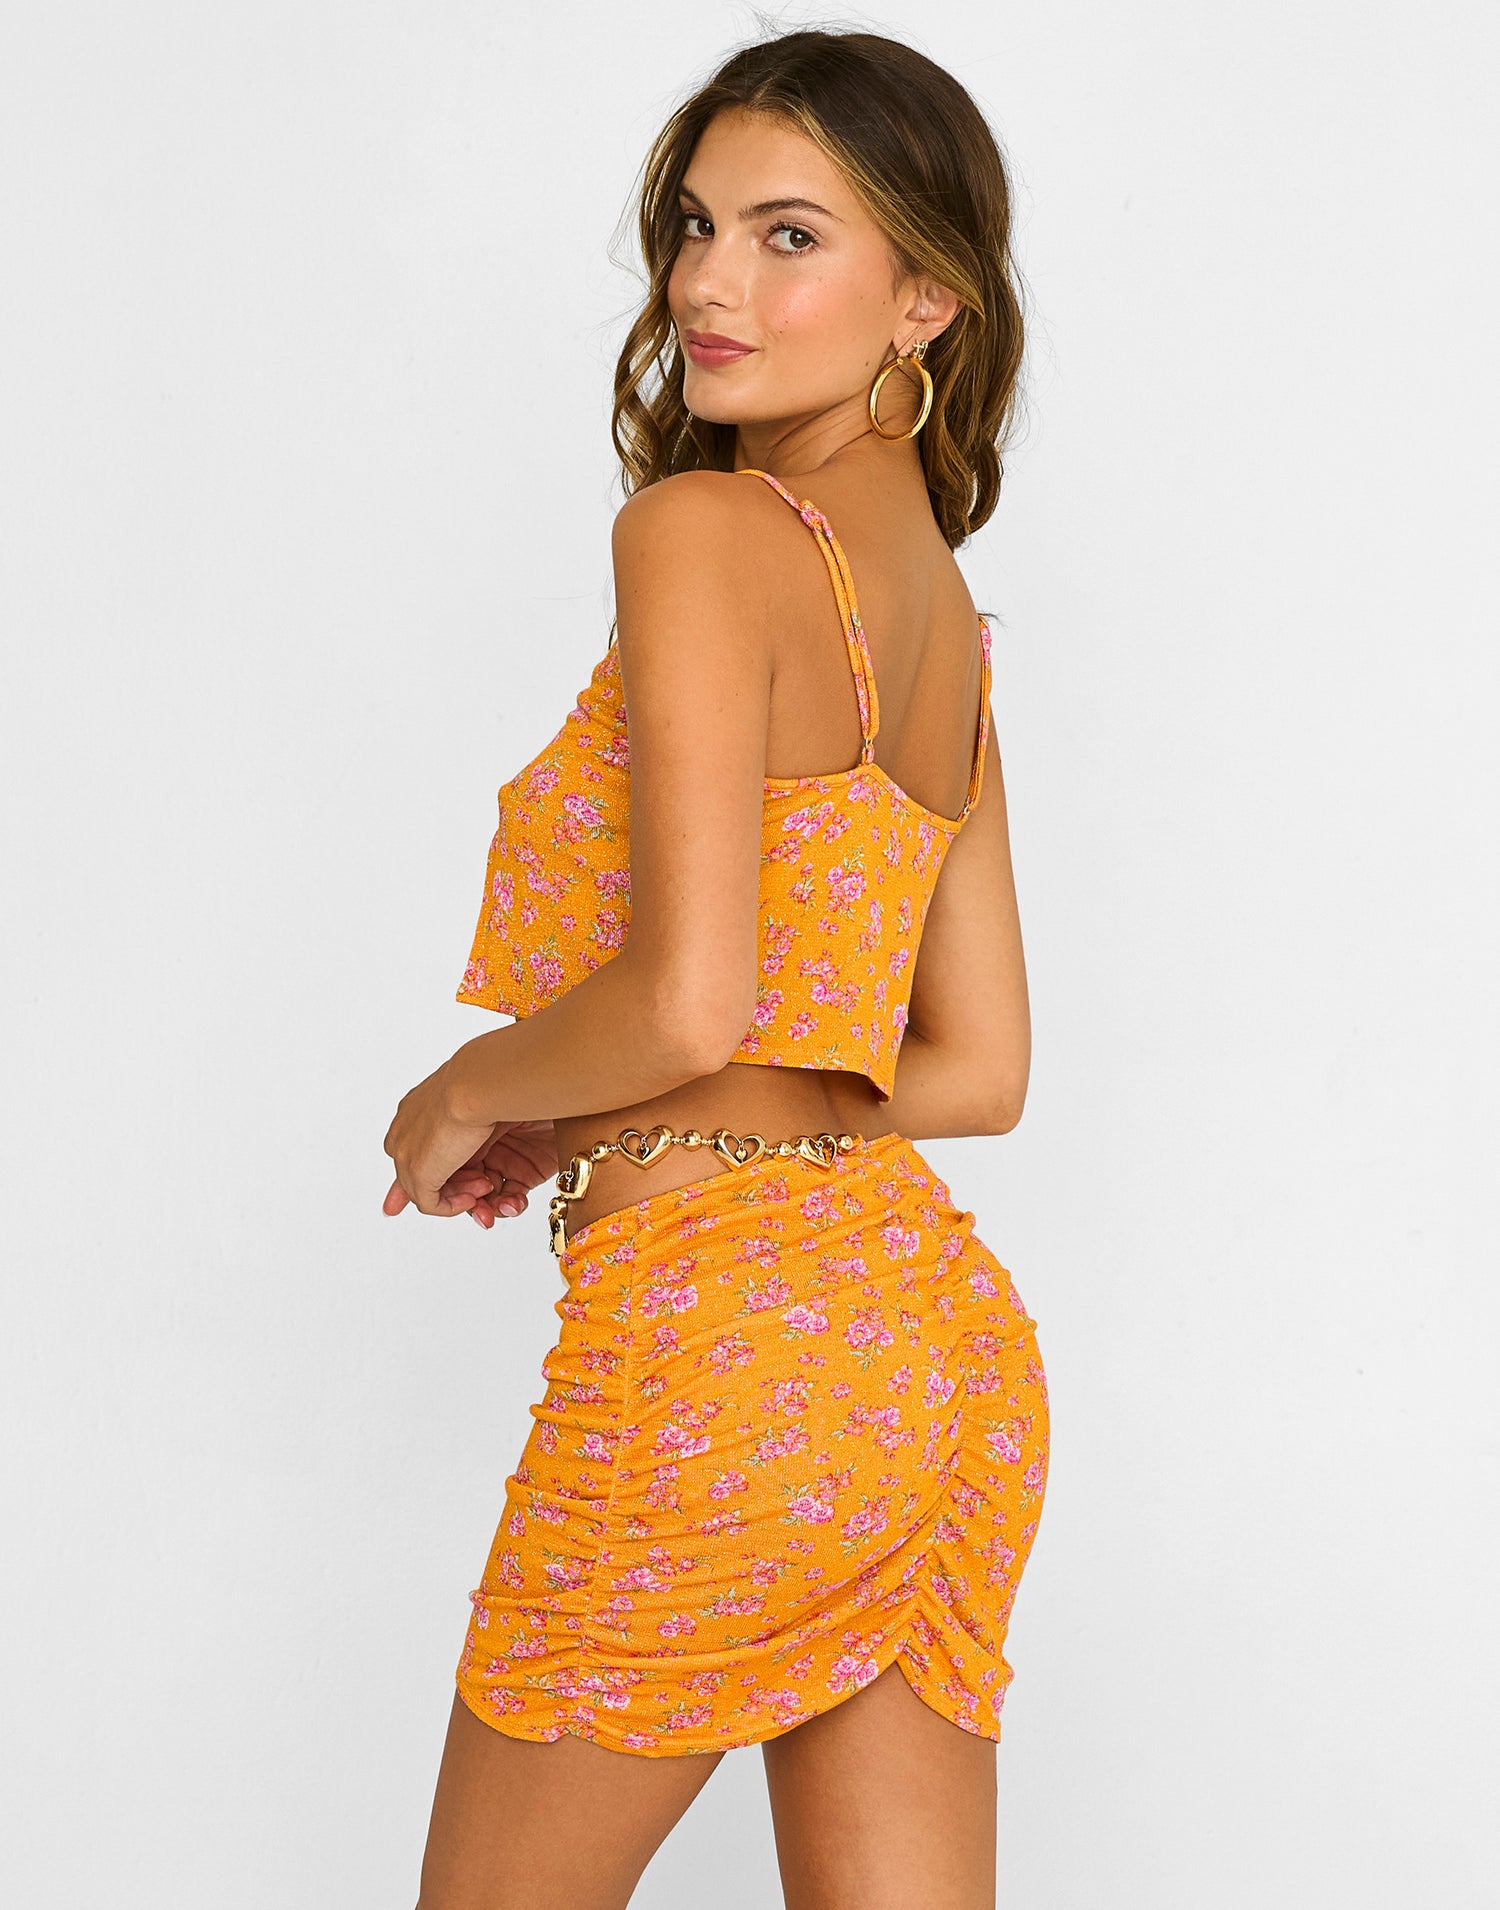 Saddie Knit Crop Top Cover Up in Orange Ditsy Floral with Gold Heart Hardware - Back View